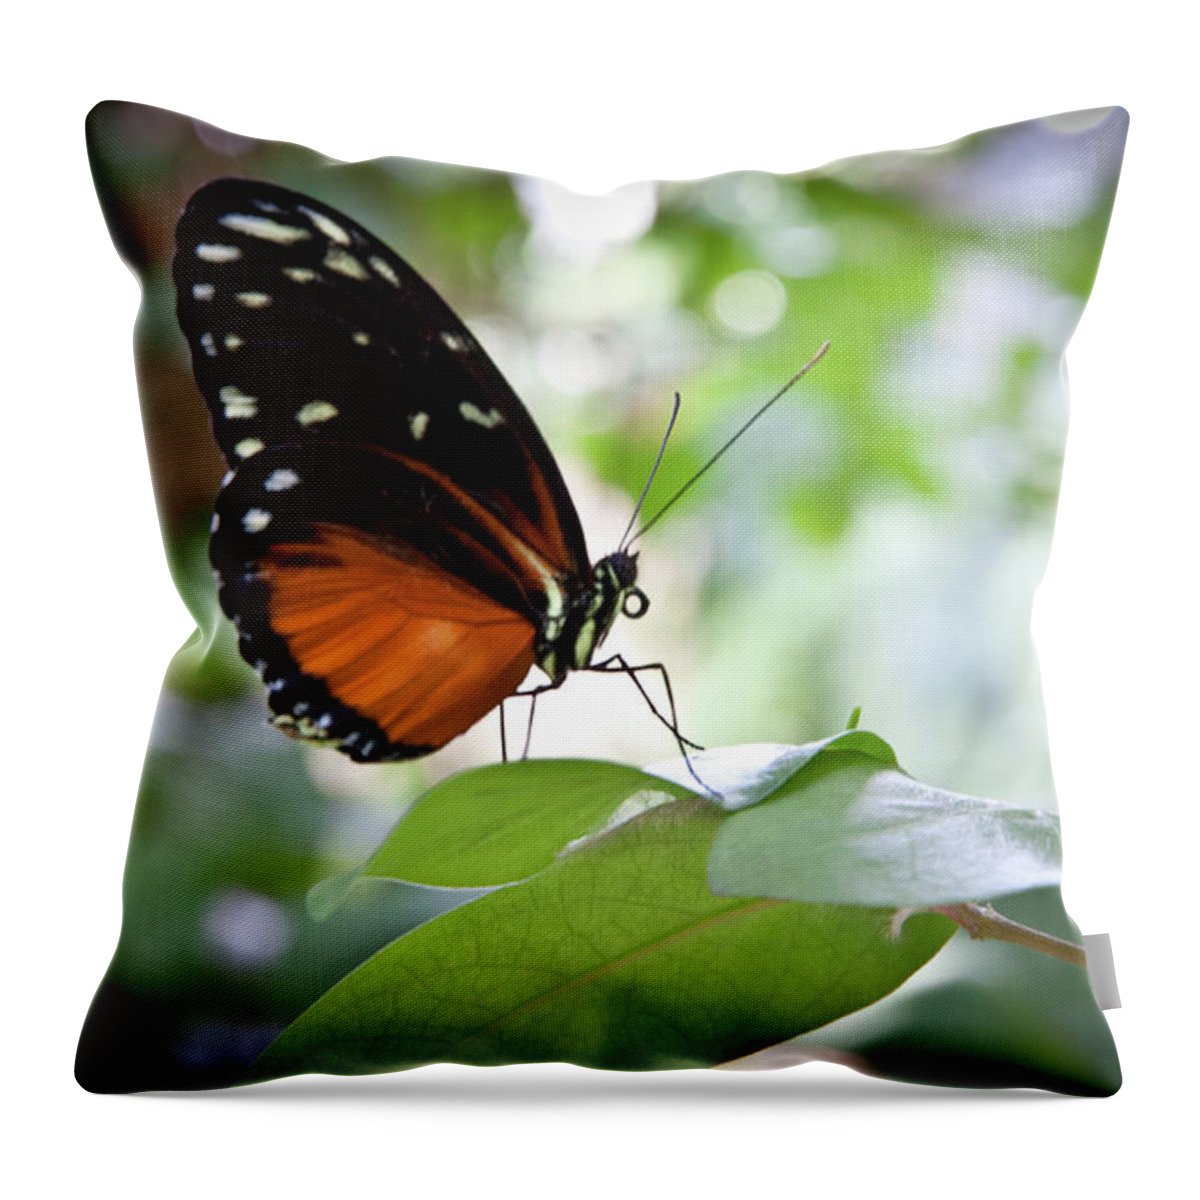 Butterflies Throw Pillow featuring the photograph Butterfly2 by James Woody